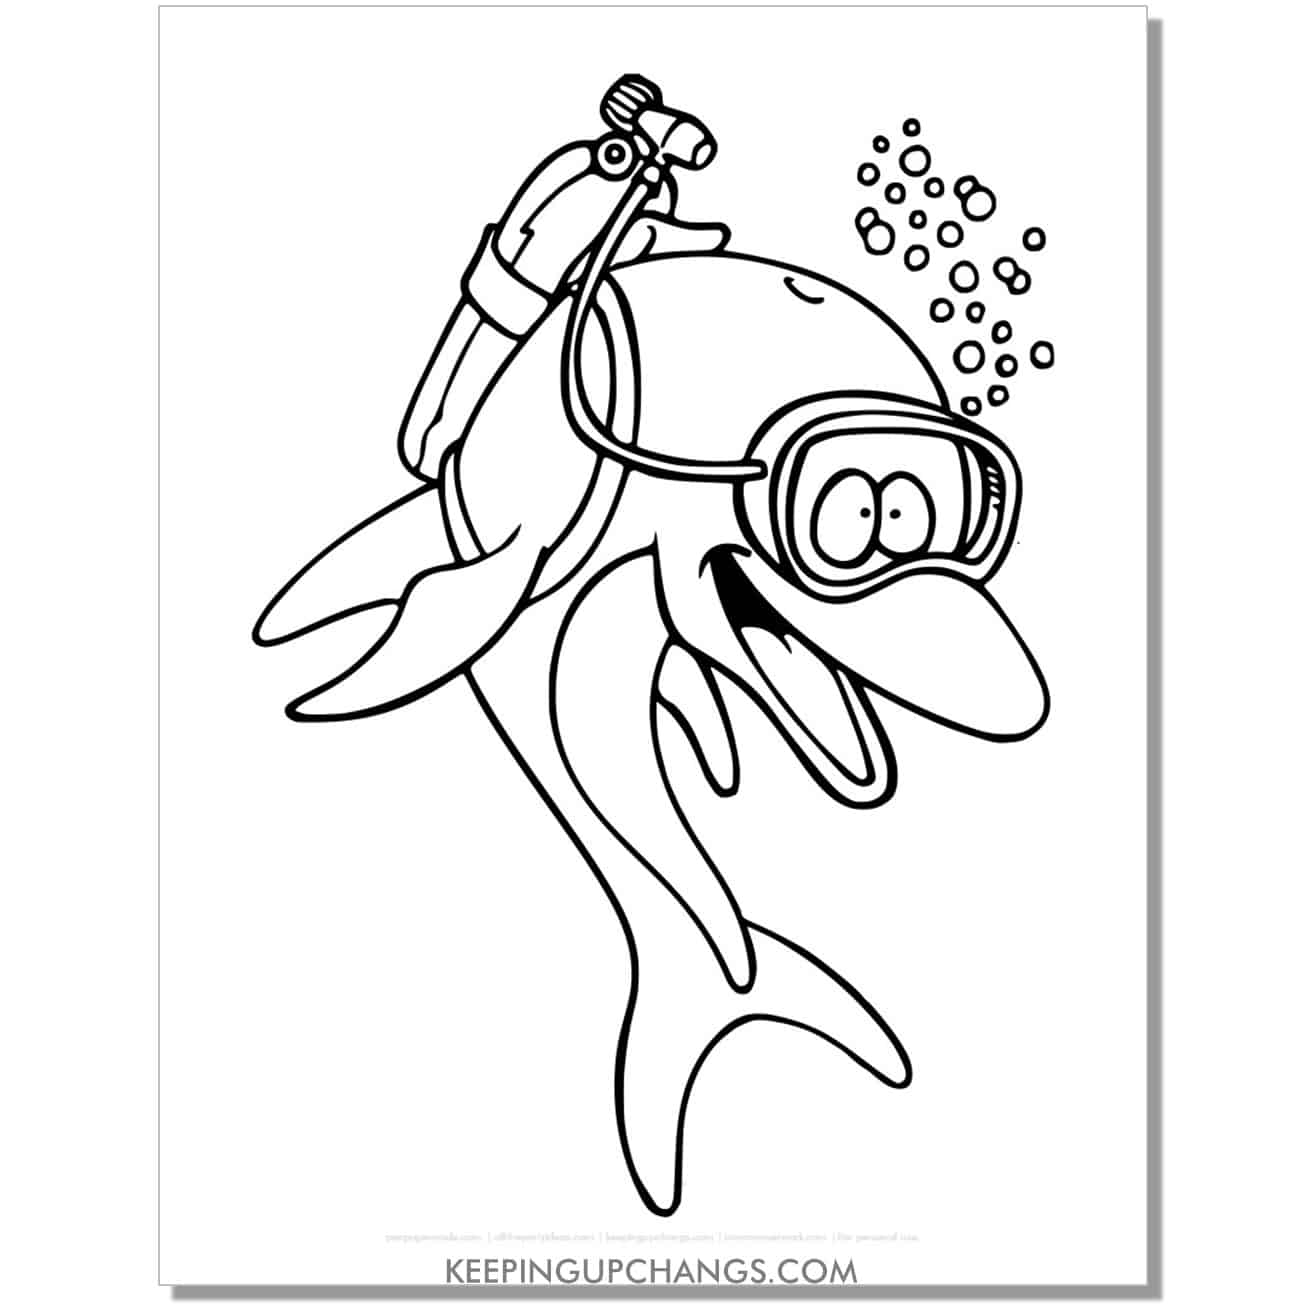 free dolphin with snorkel scuba gear coloring page, sheet.